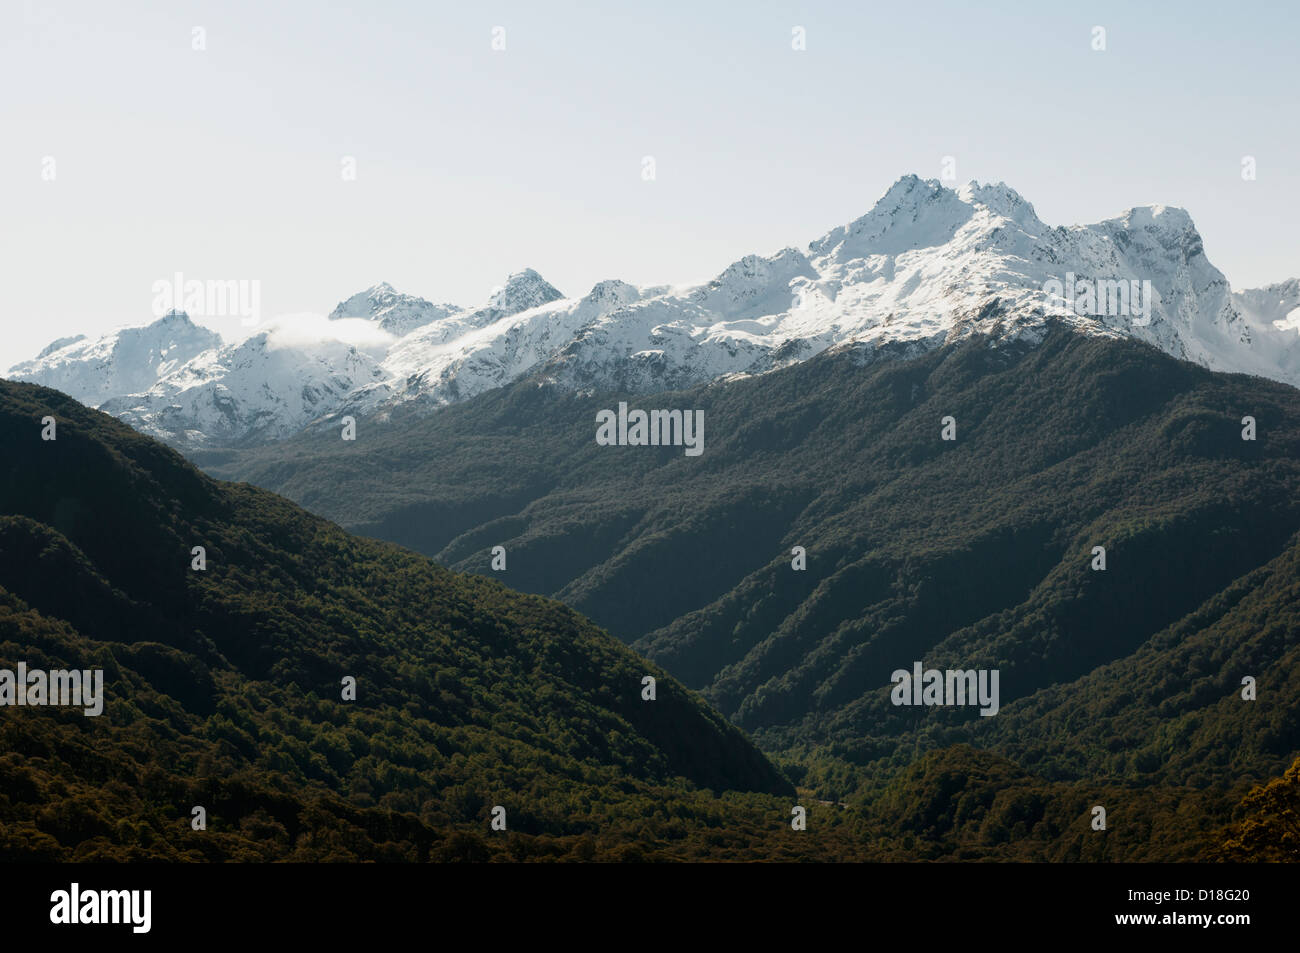 Forests on snowy mountains Stock Photo